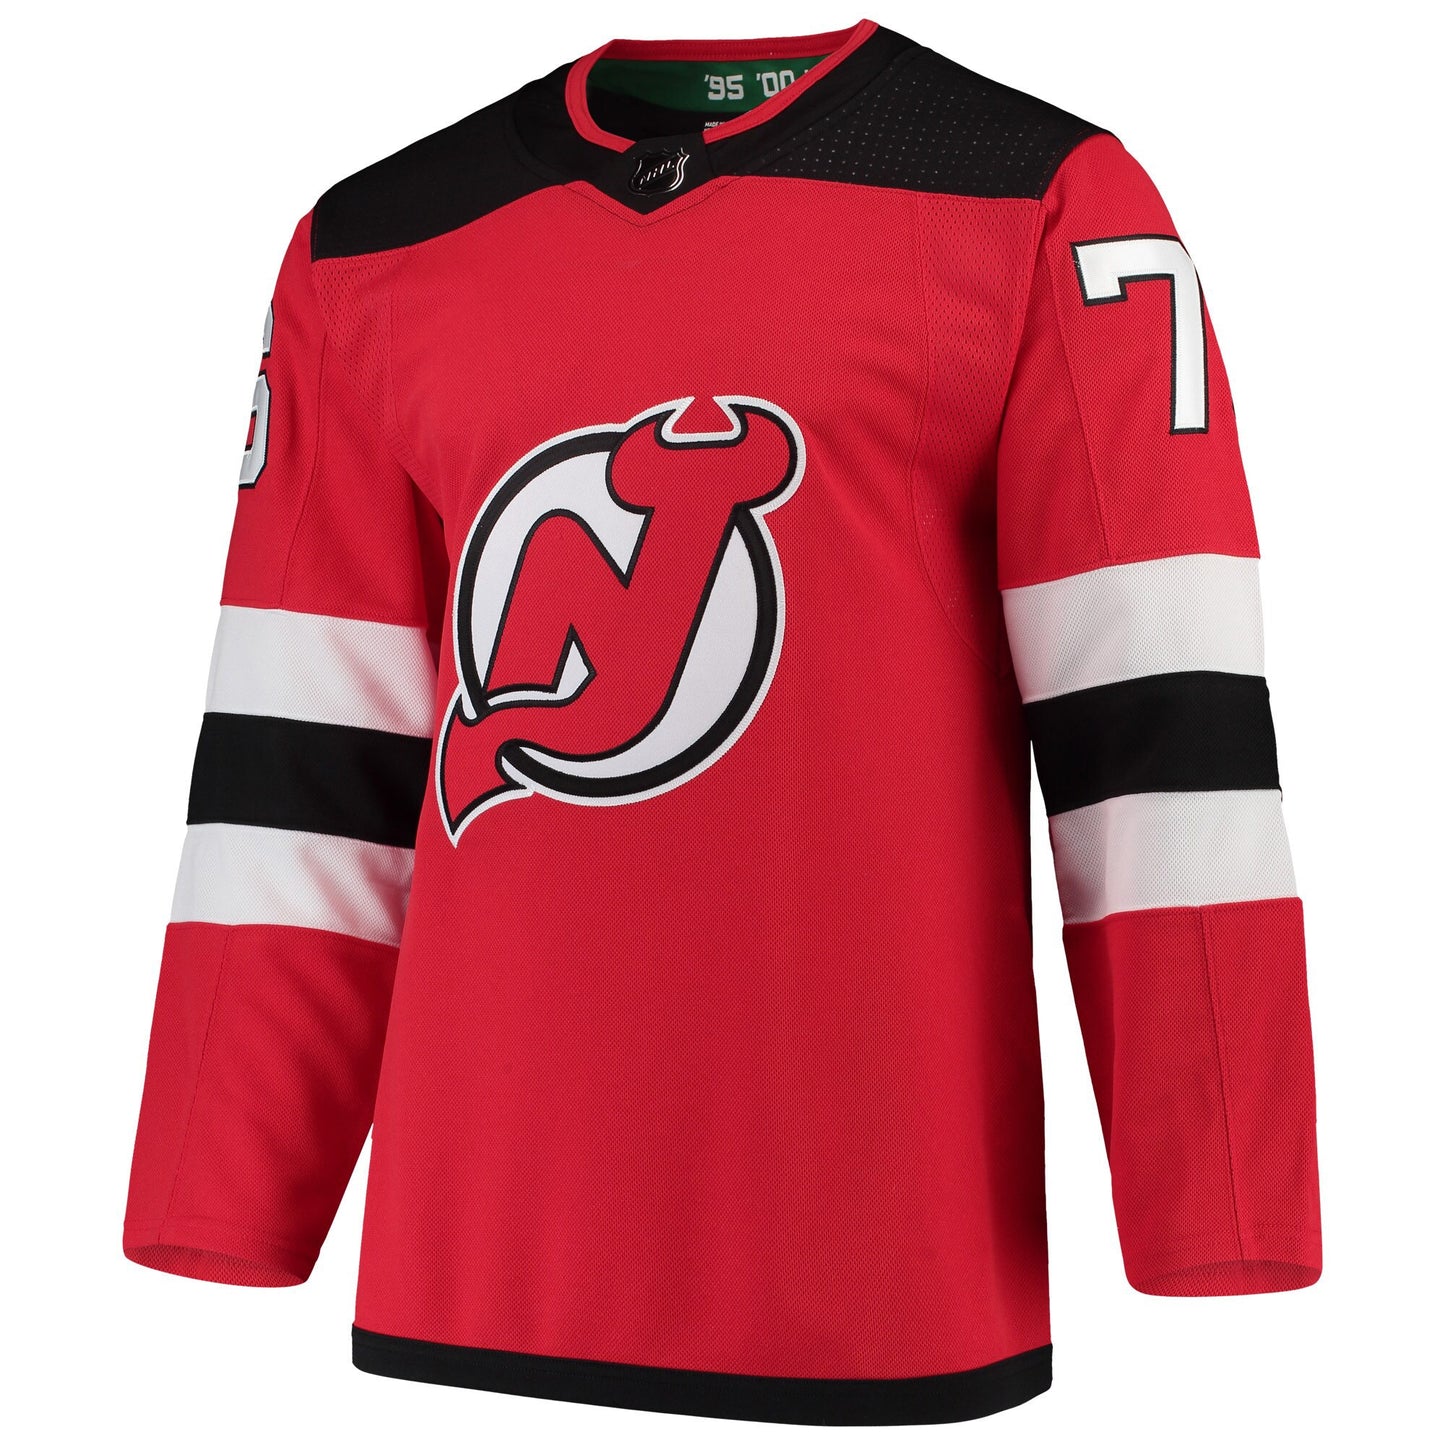 P.K. Subban New Jersey Devils adidas Home Authentic Player Jersey - Red